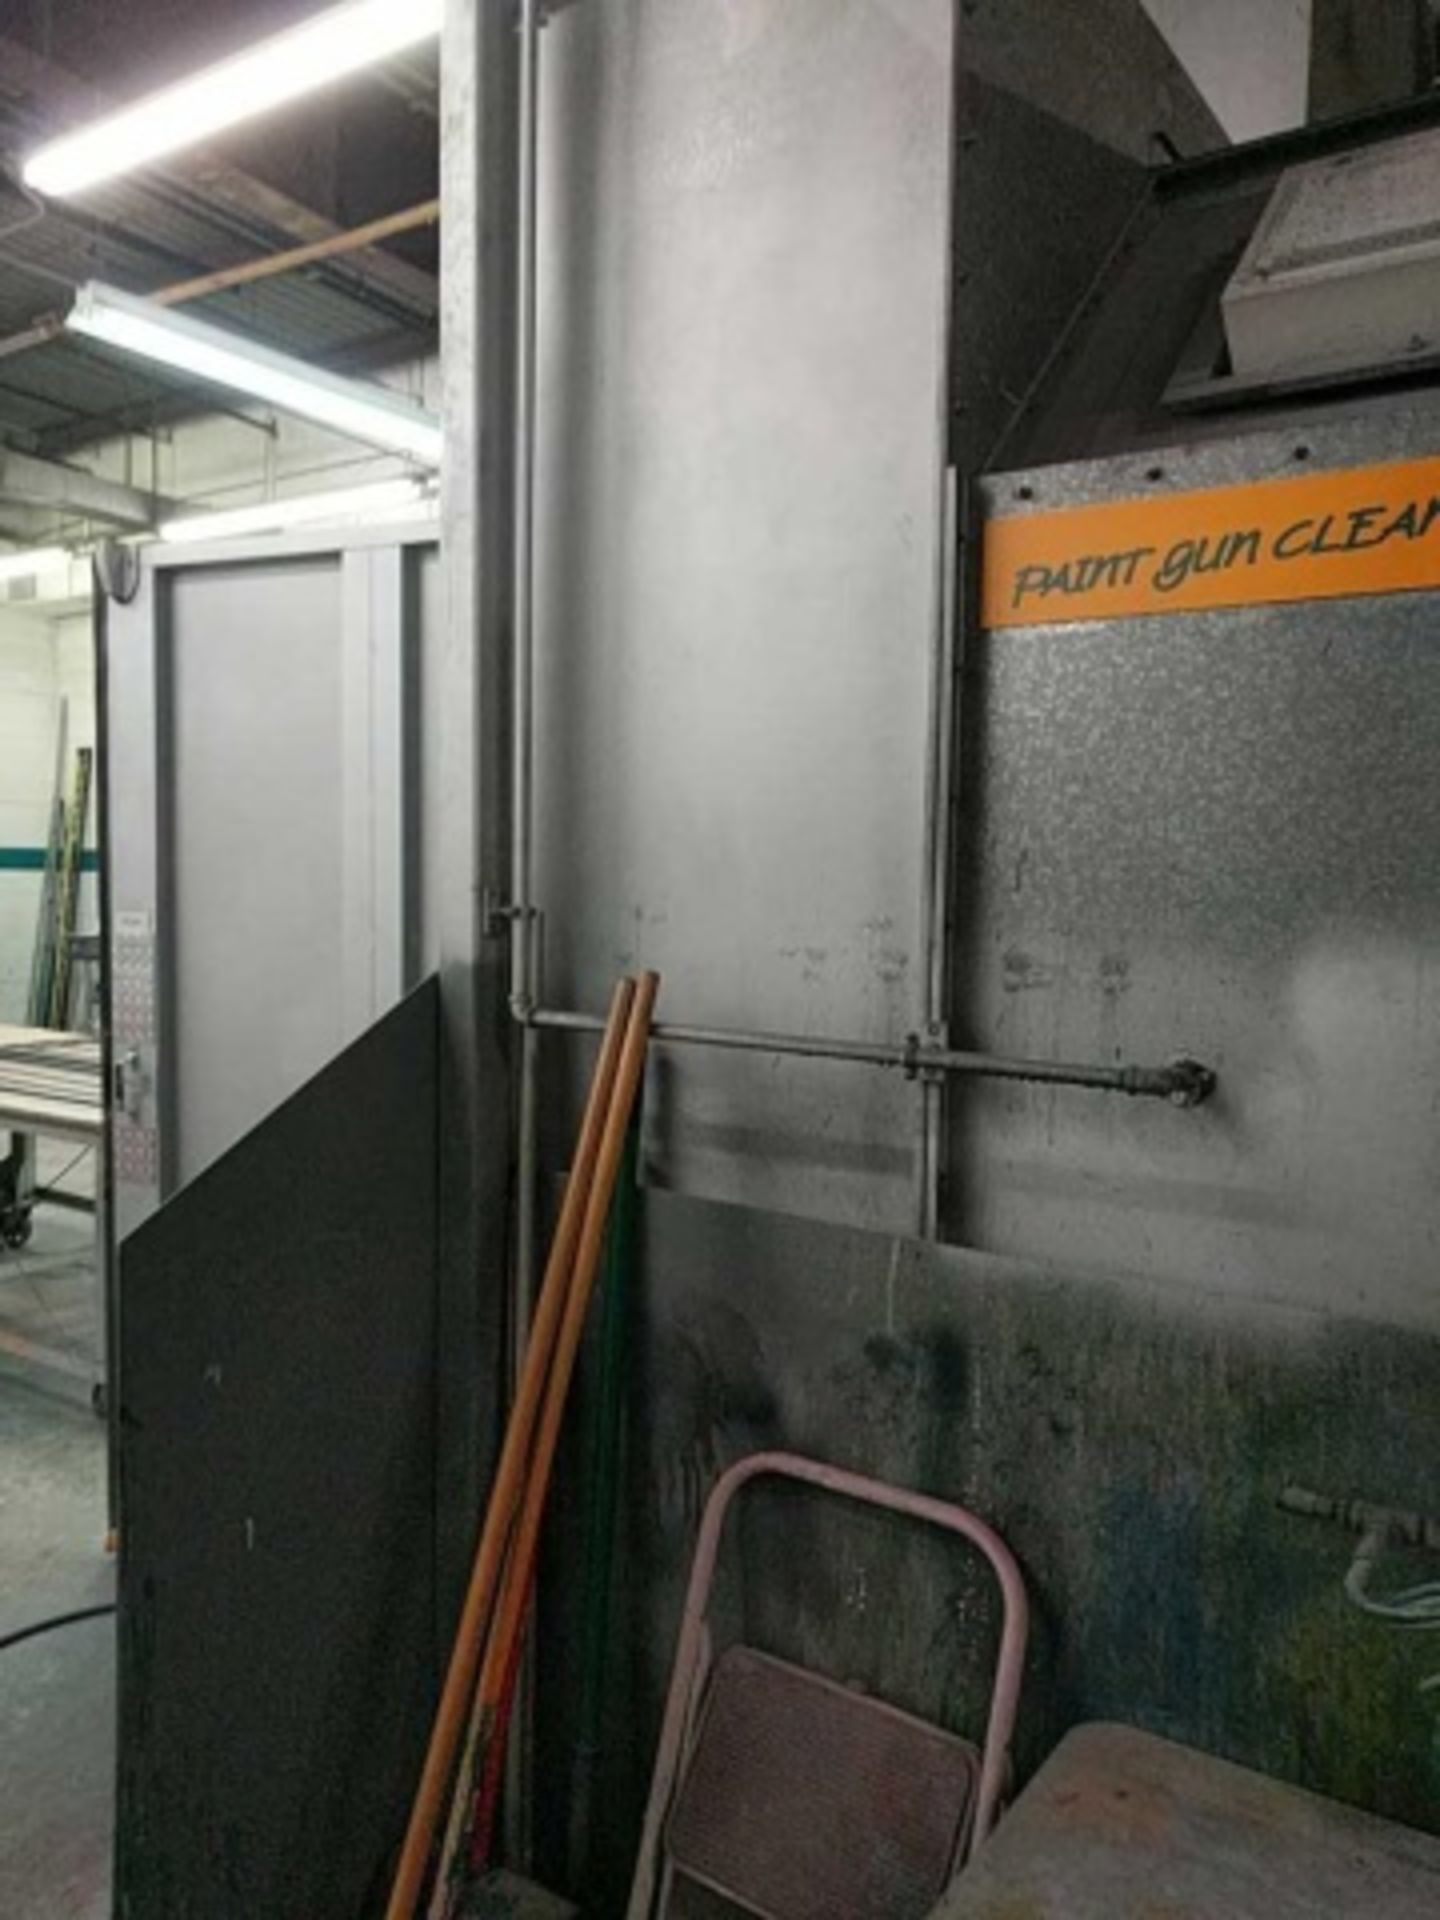 Binks Paint Spray Booth (#1) - Image 9 of 9